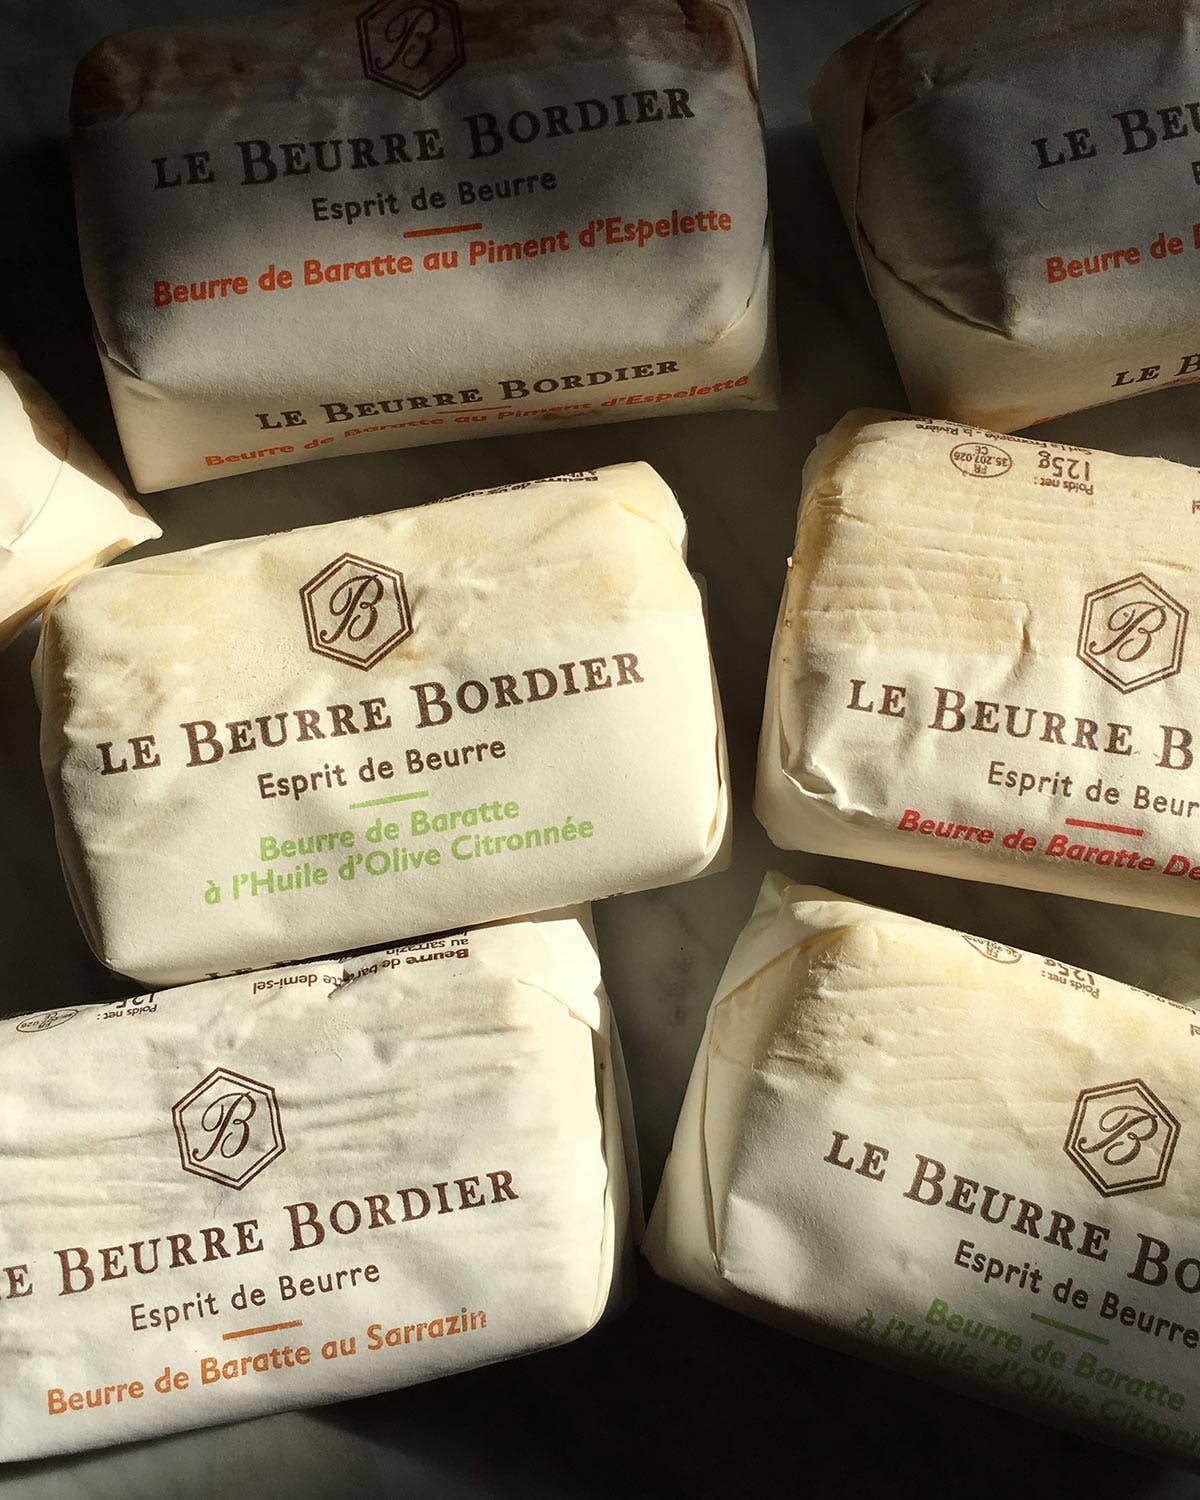 Here’s Why Bordier Might Be the Best Butter in the World